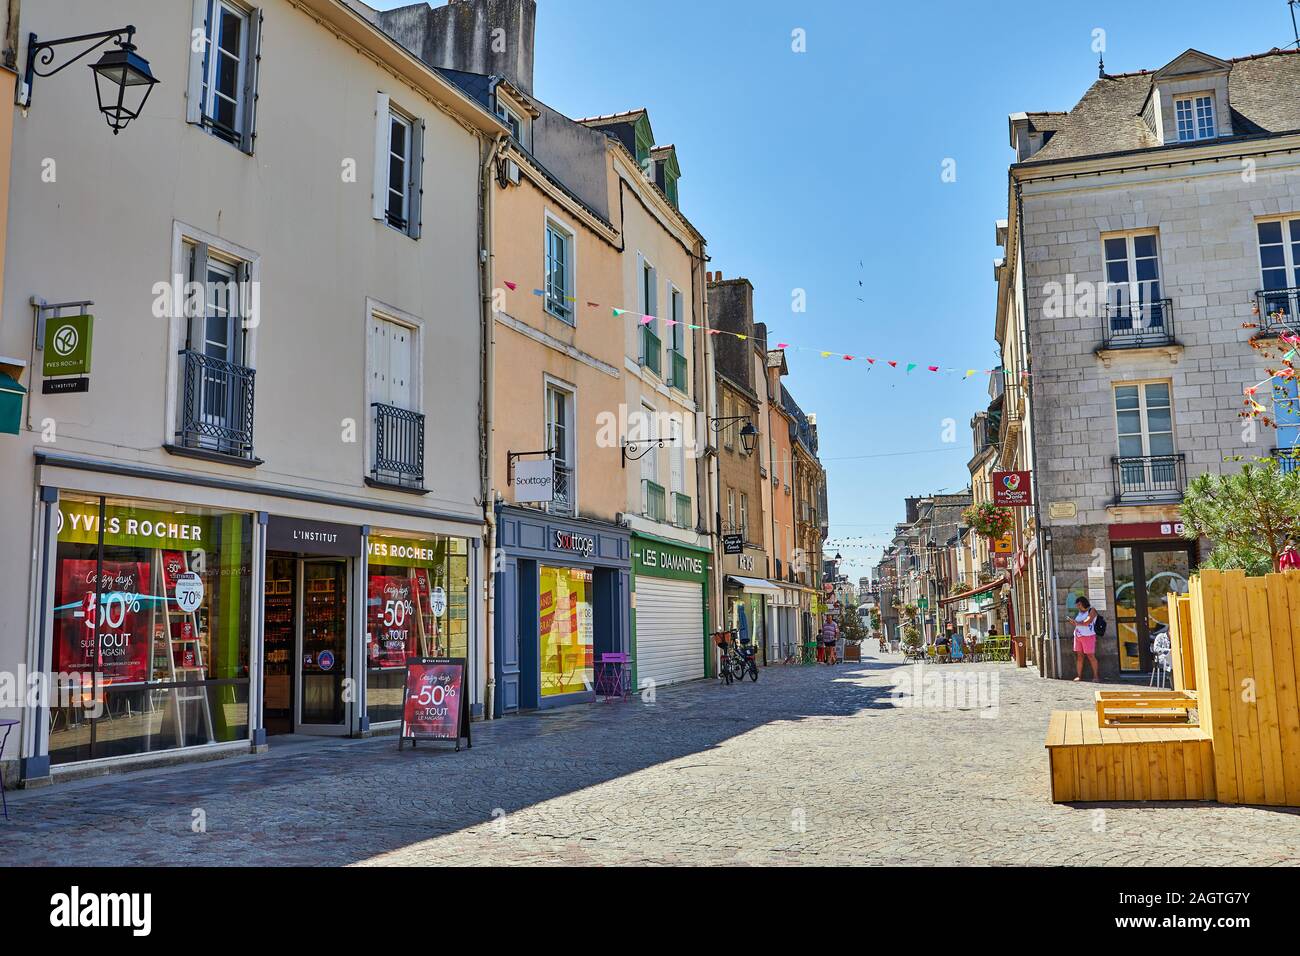 Image of Redon, Brittany, France.  Redon is a popular tourist destination in Southern Brittany with medeval buildings, shopping, train station, restau Stock Photo